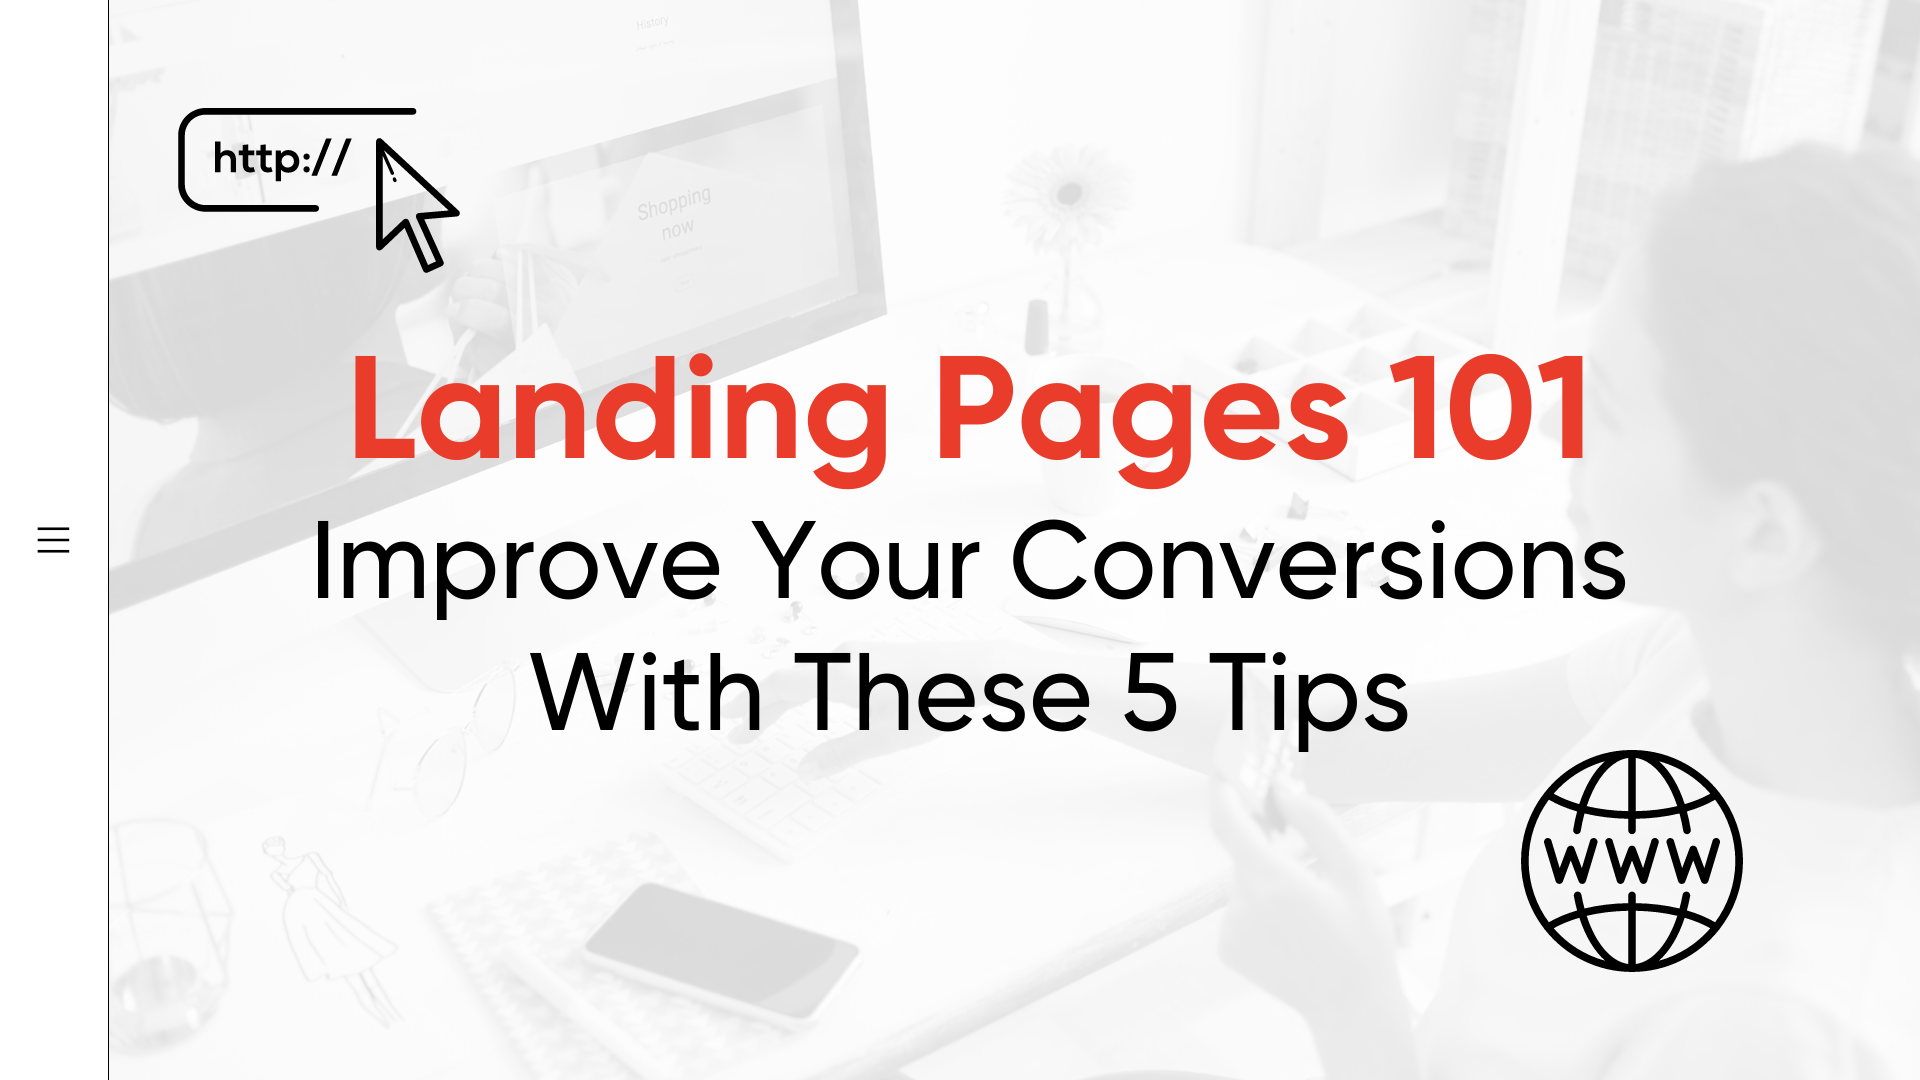 landing pages, landing page best practices, landing page conversions, improve conversions, small business tips, landing page tips, landing pages, landing page optimization, landing page 101, what is a landing page